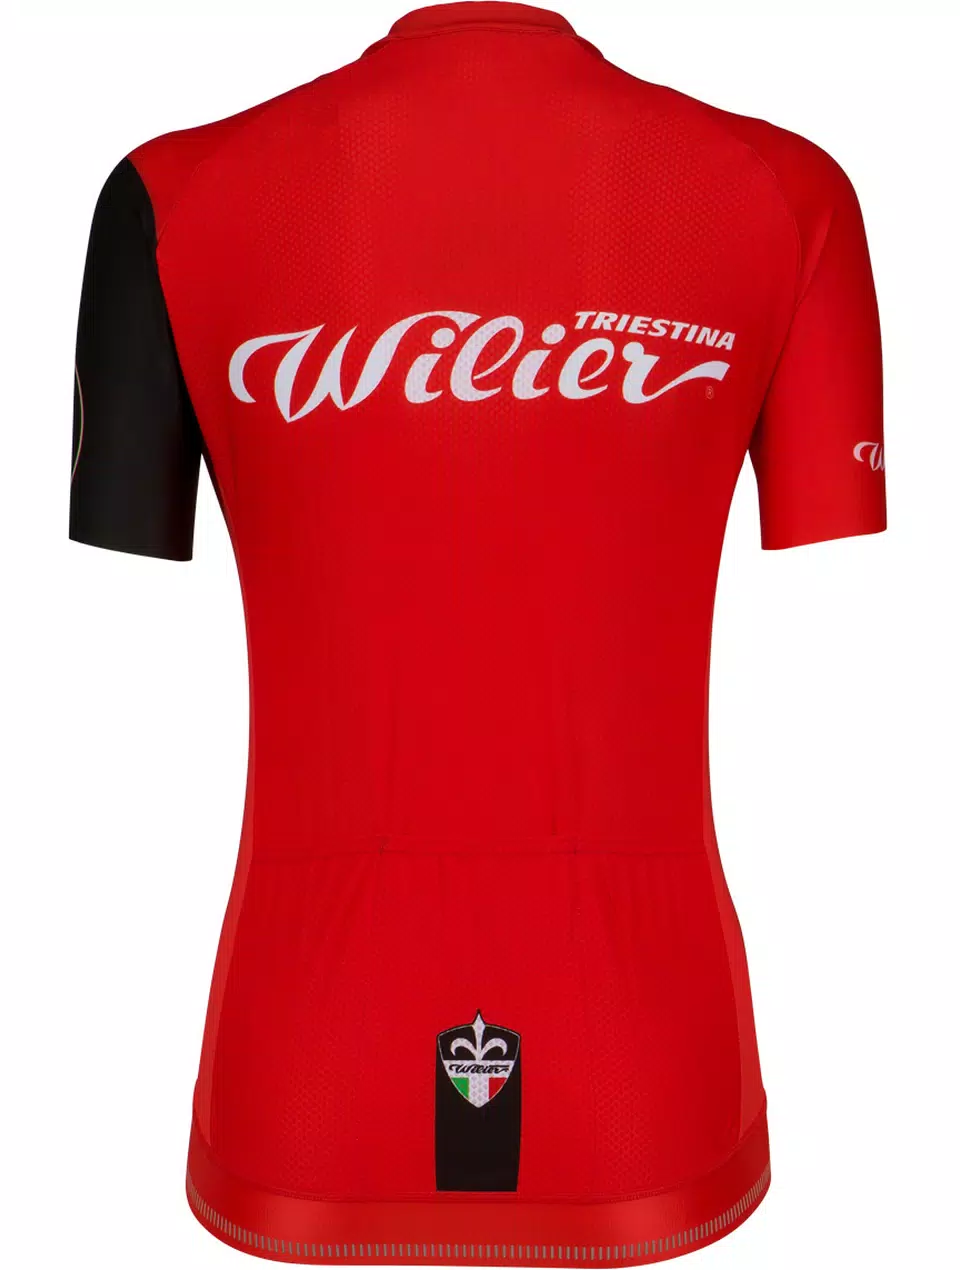 Maillot mujer Wilier Cycling Club rojo, Wilier Triestina